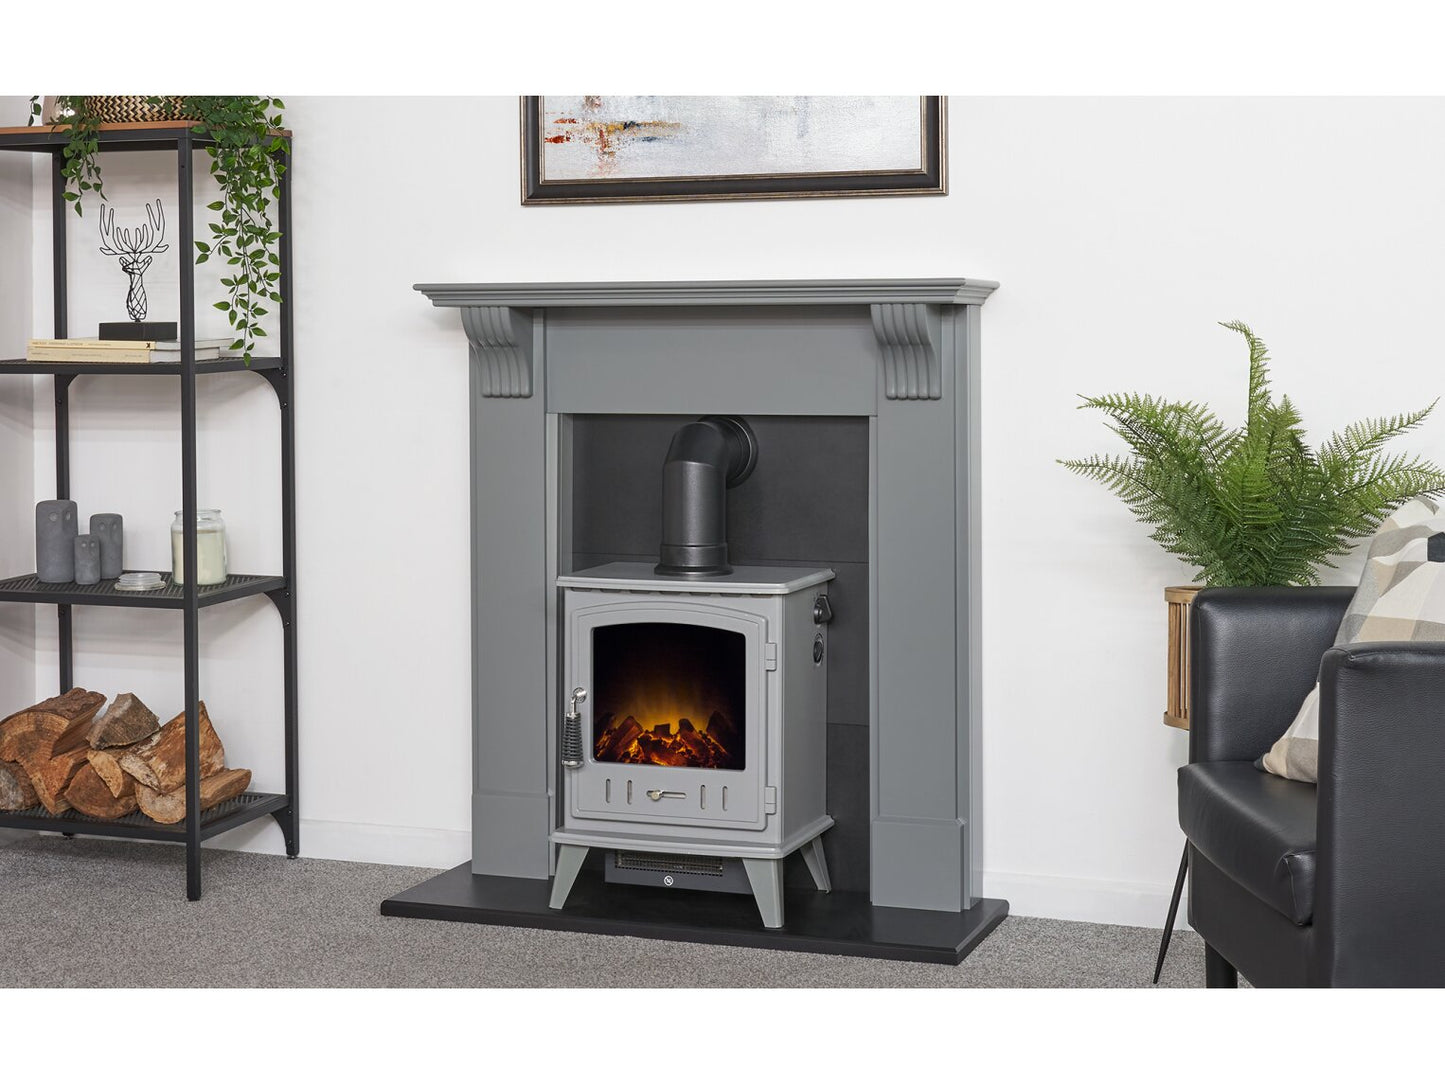 Adam Harrogate Stove Fireplace with Aviemore Electric Stove, 39 Inch 23778 Grey & Black